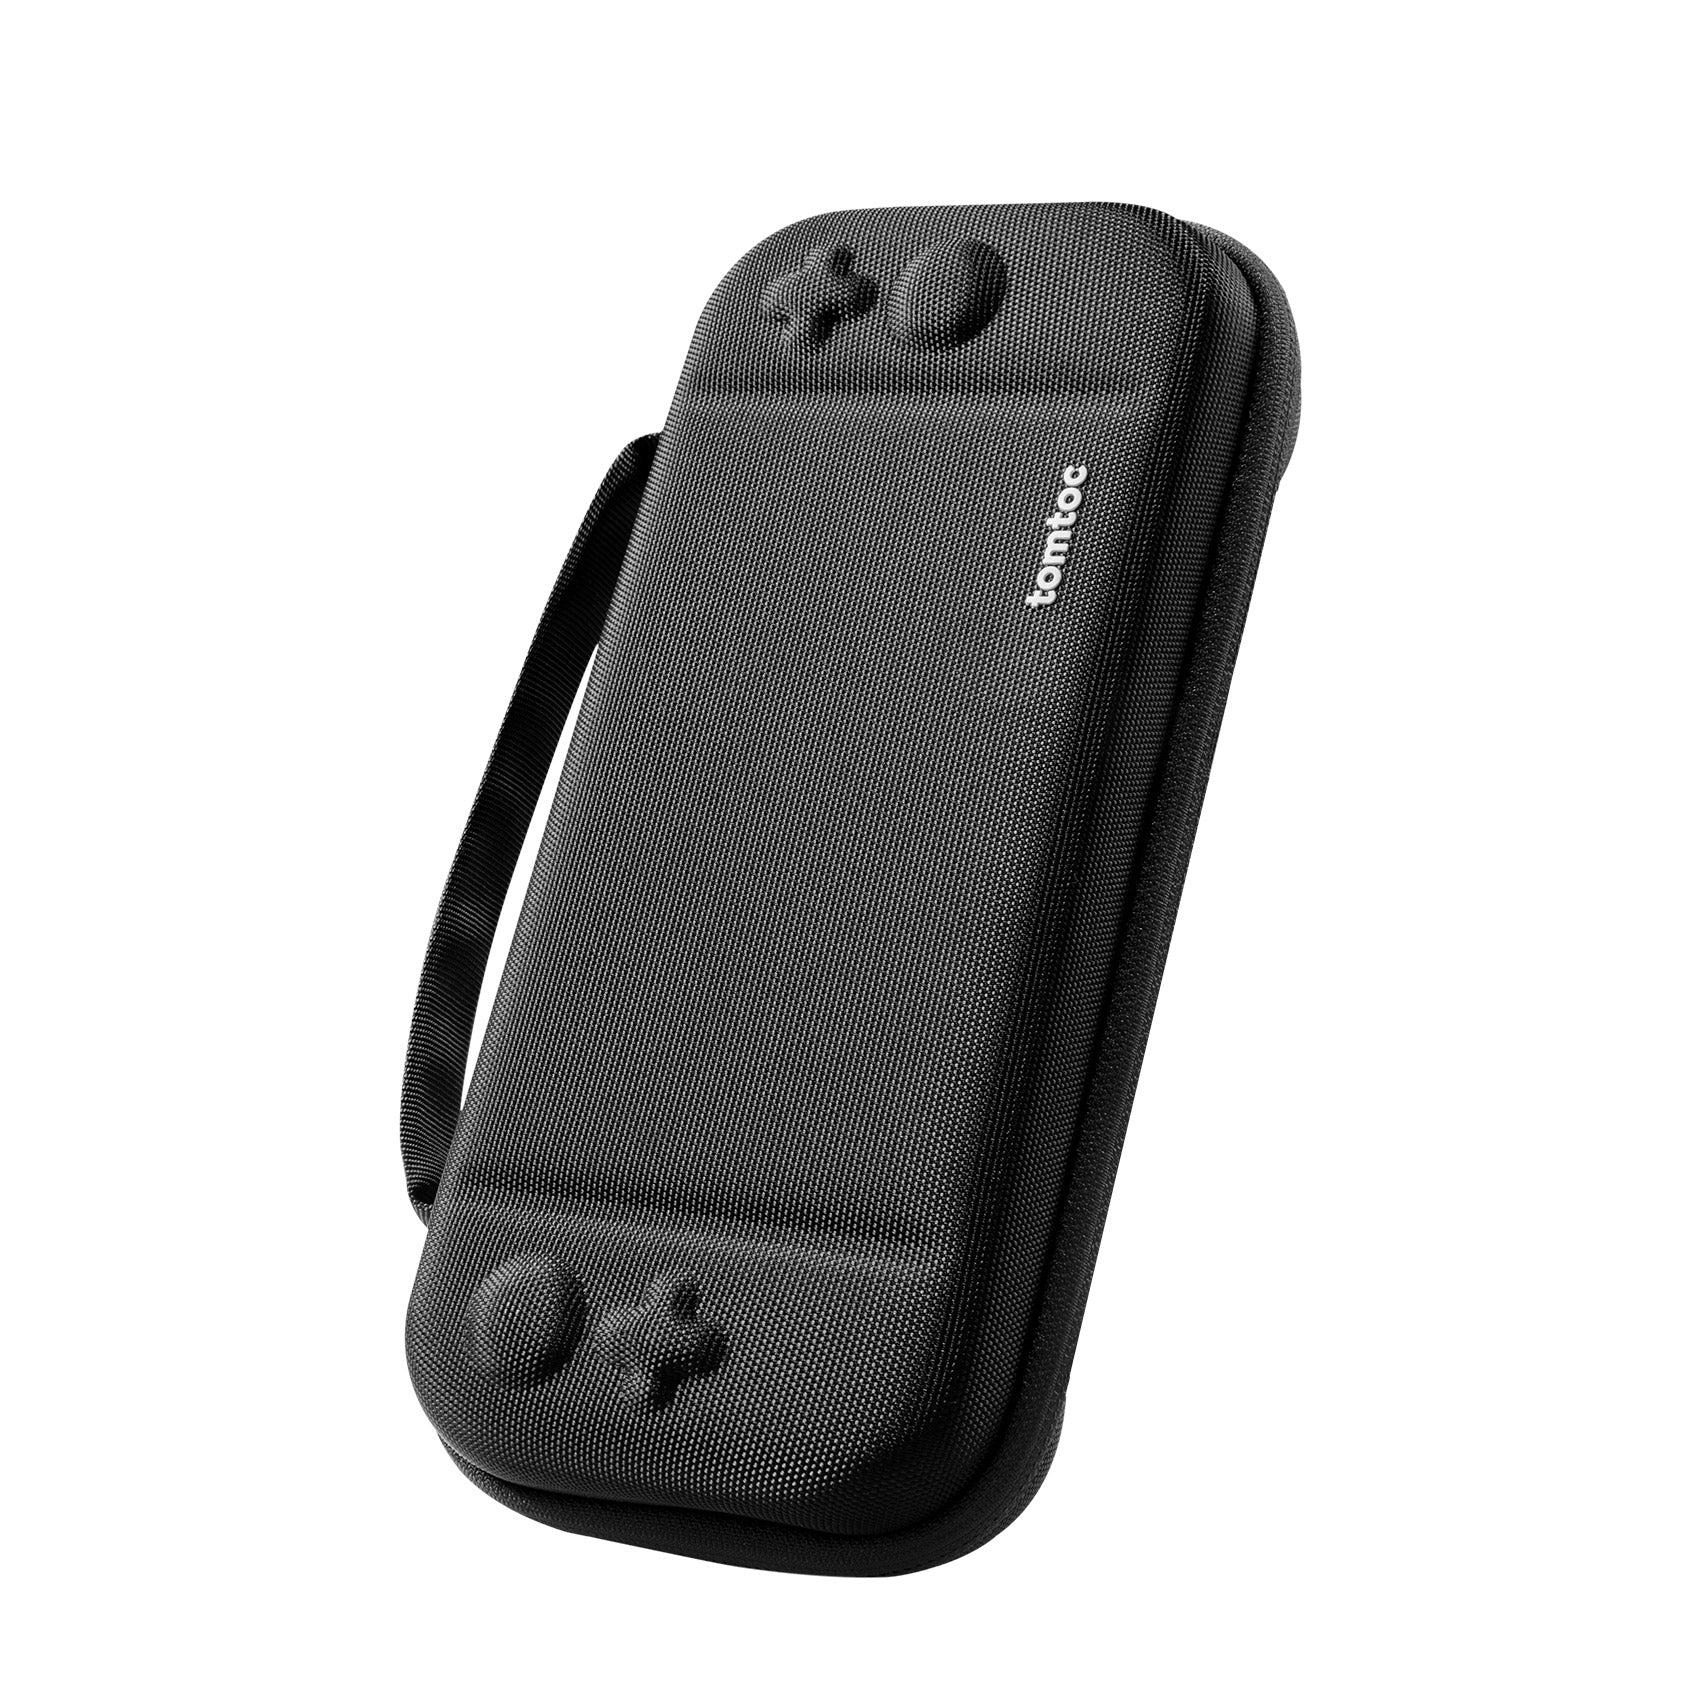 tomtoc Carrying Case Travel Nintendo Switch Case with 12 Game Cartridges - Black